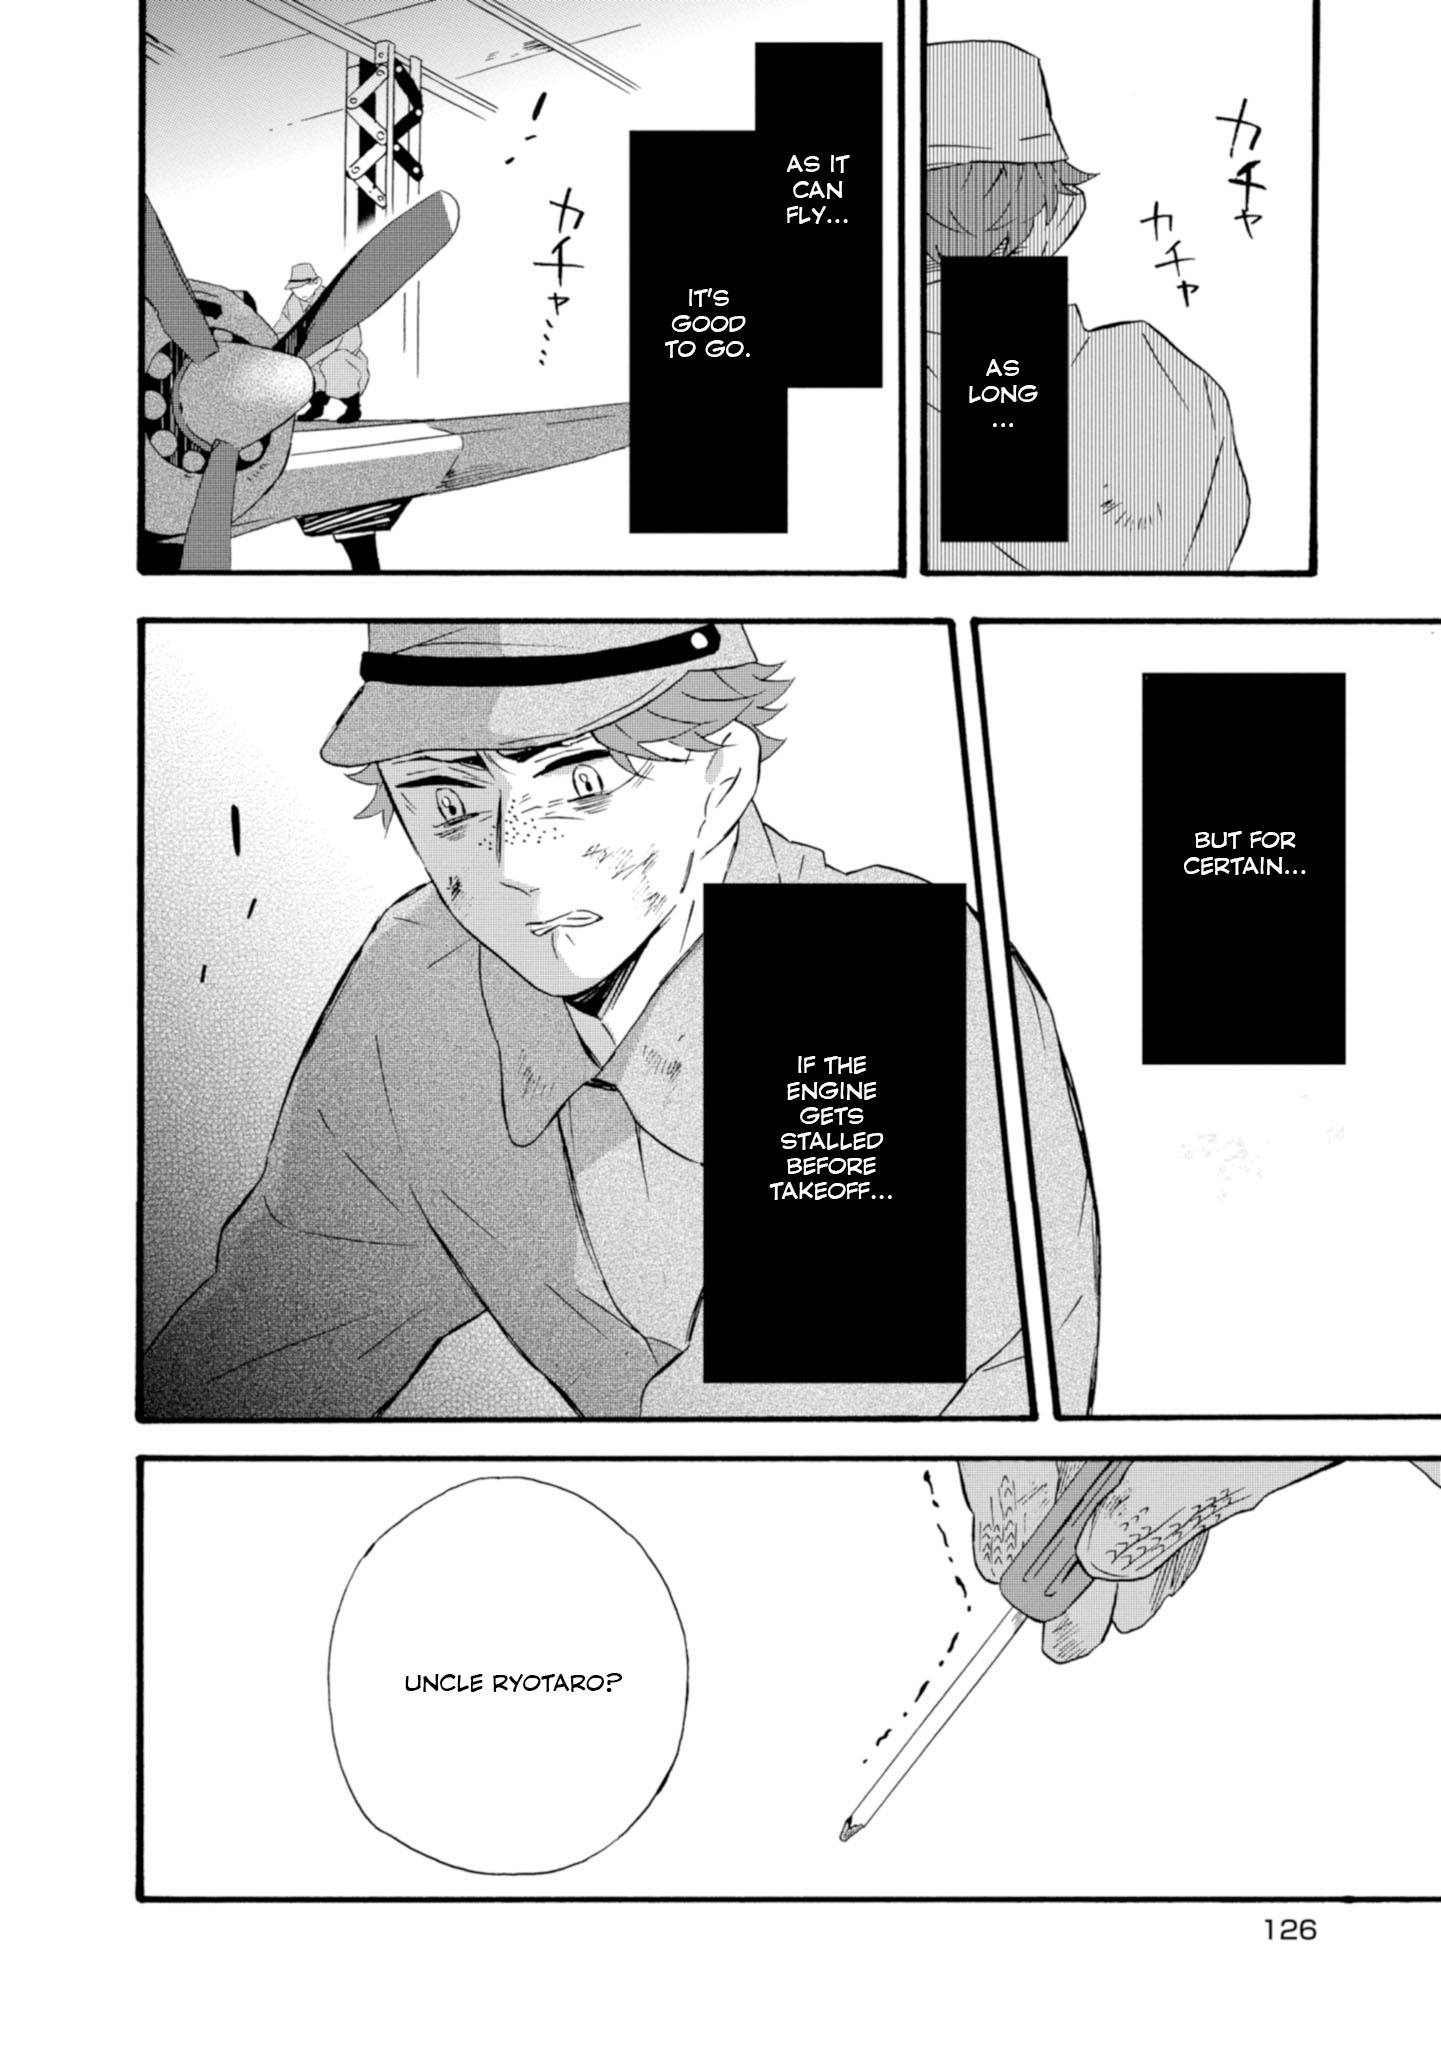 Will You Marry Me Again If You Are Reborn? Vol.4 Chapter 21: For 21 Years 1 Month, He Lived - Picture 3